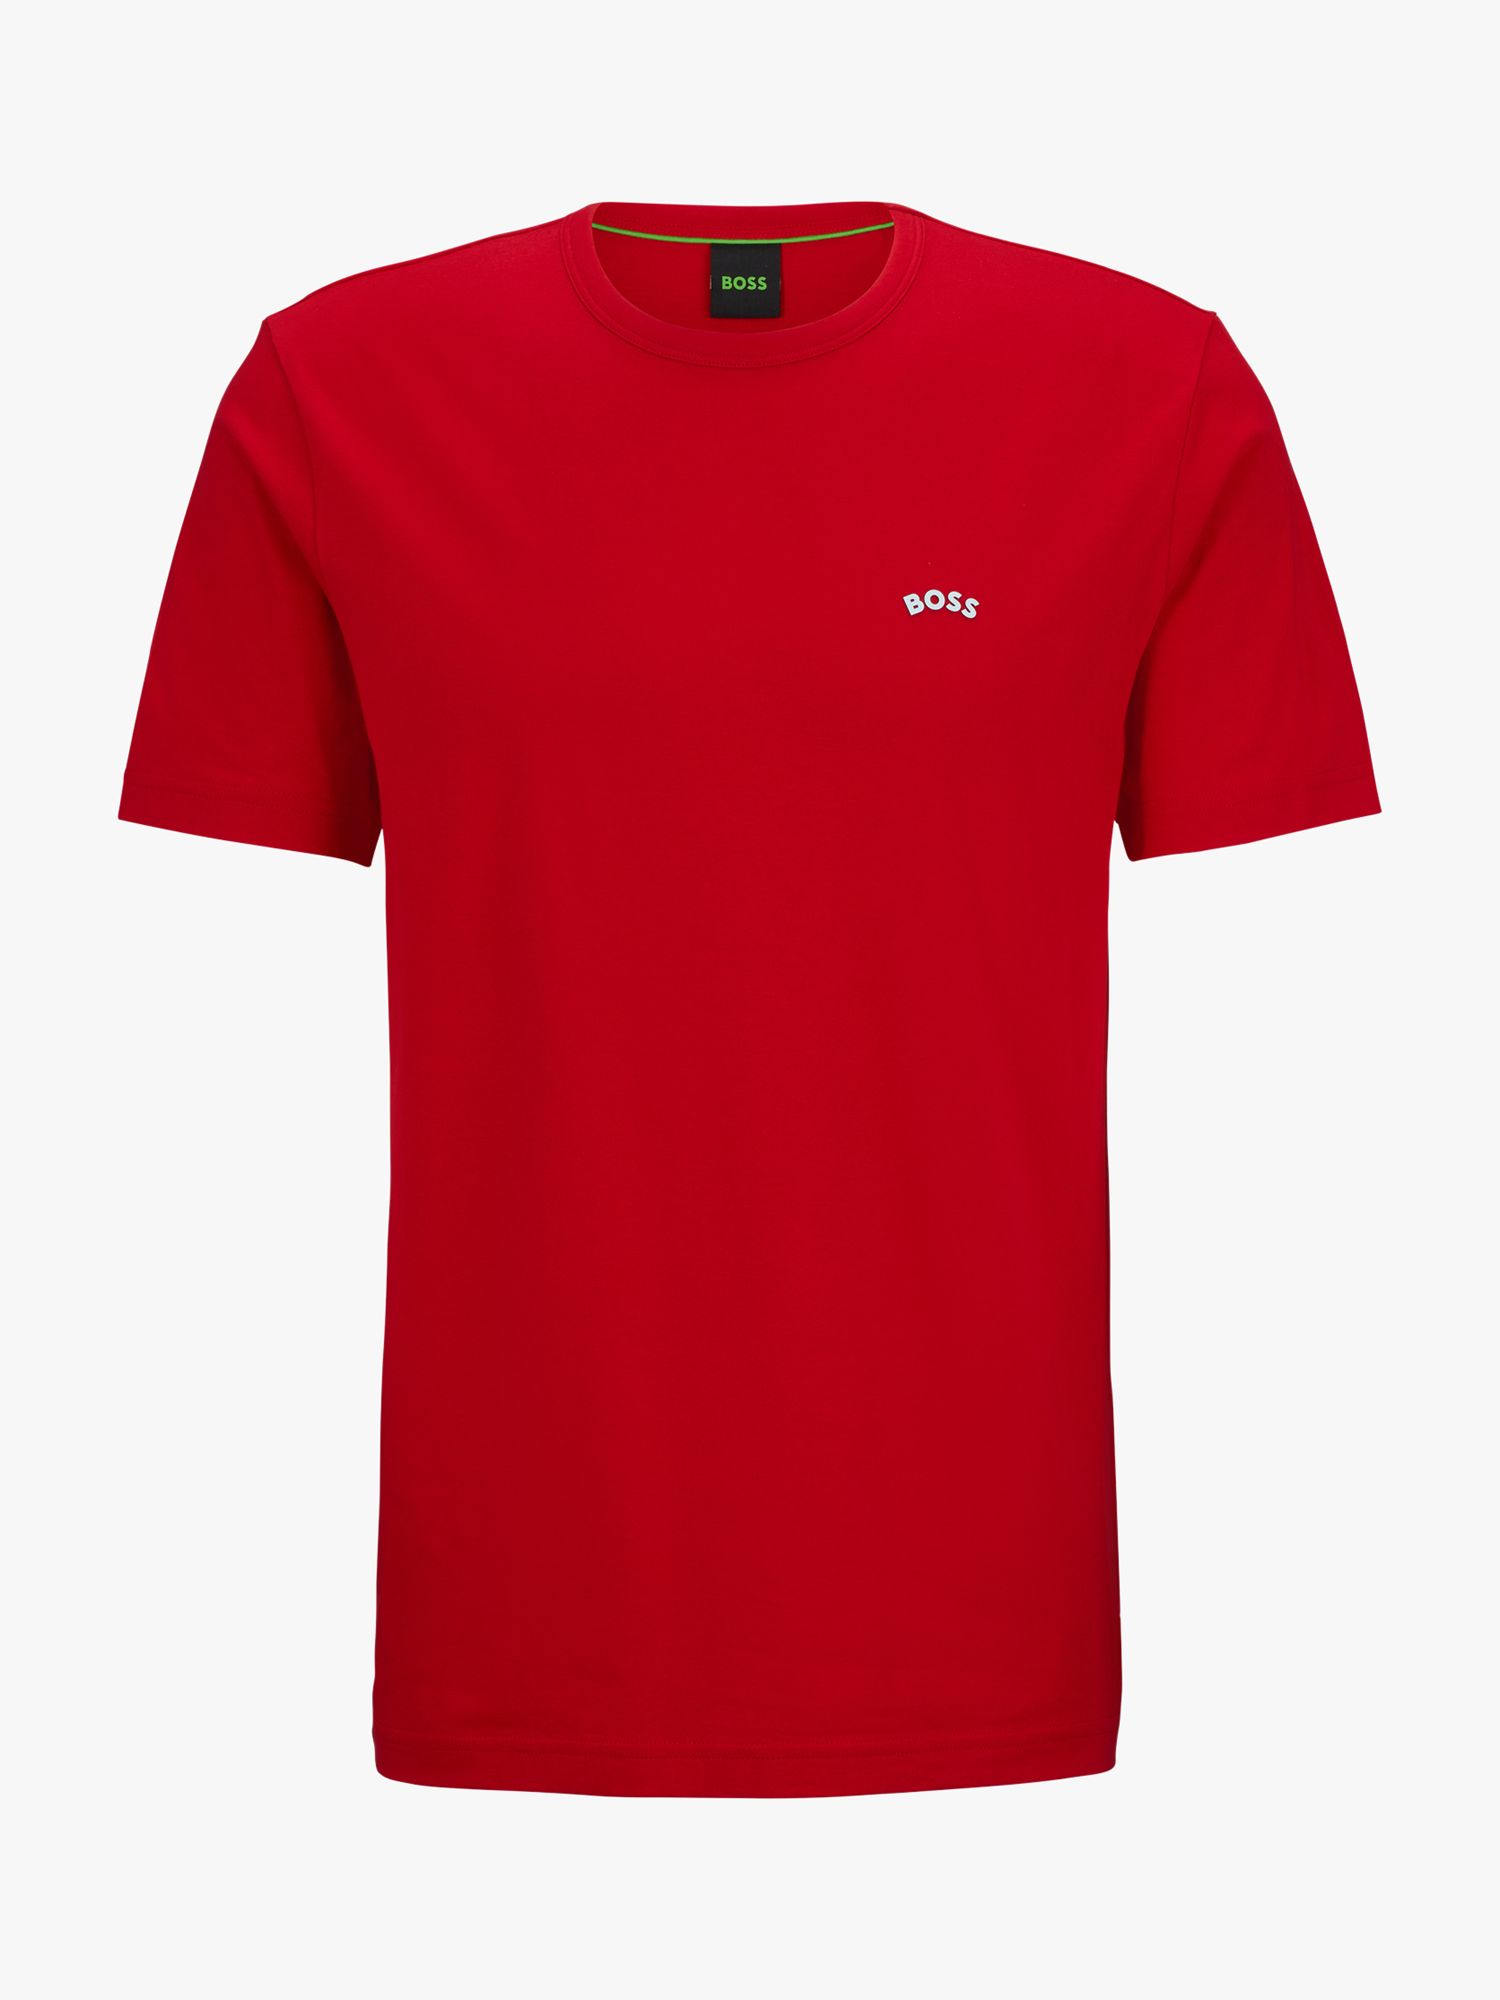 BOSS Curved Tee, Medium Red at John Lewis & Partners